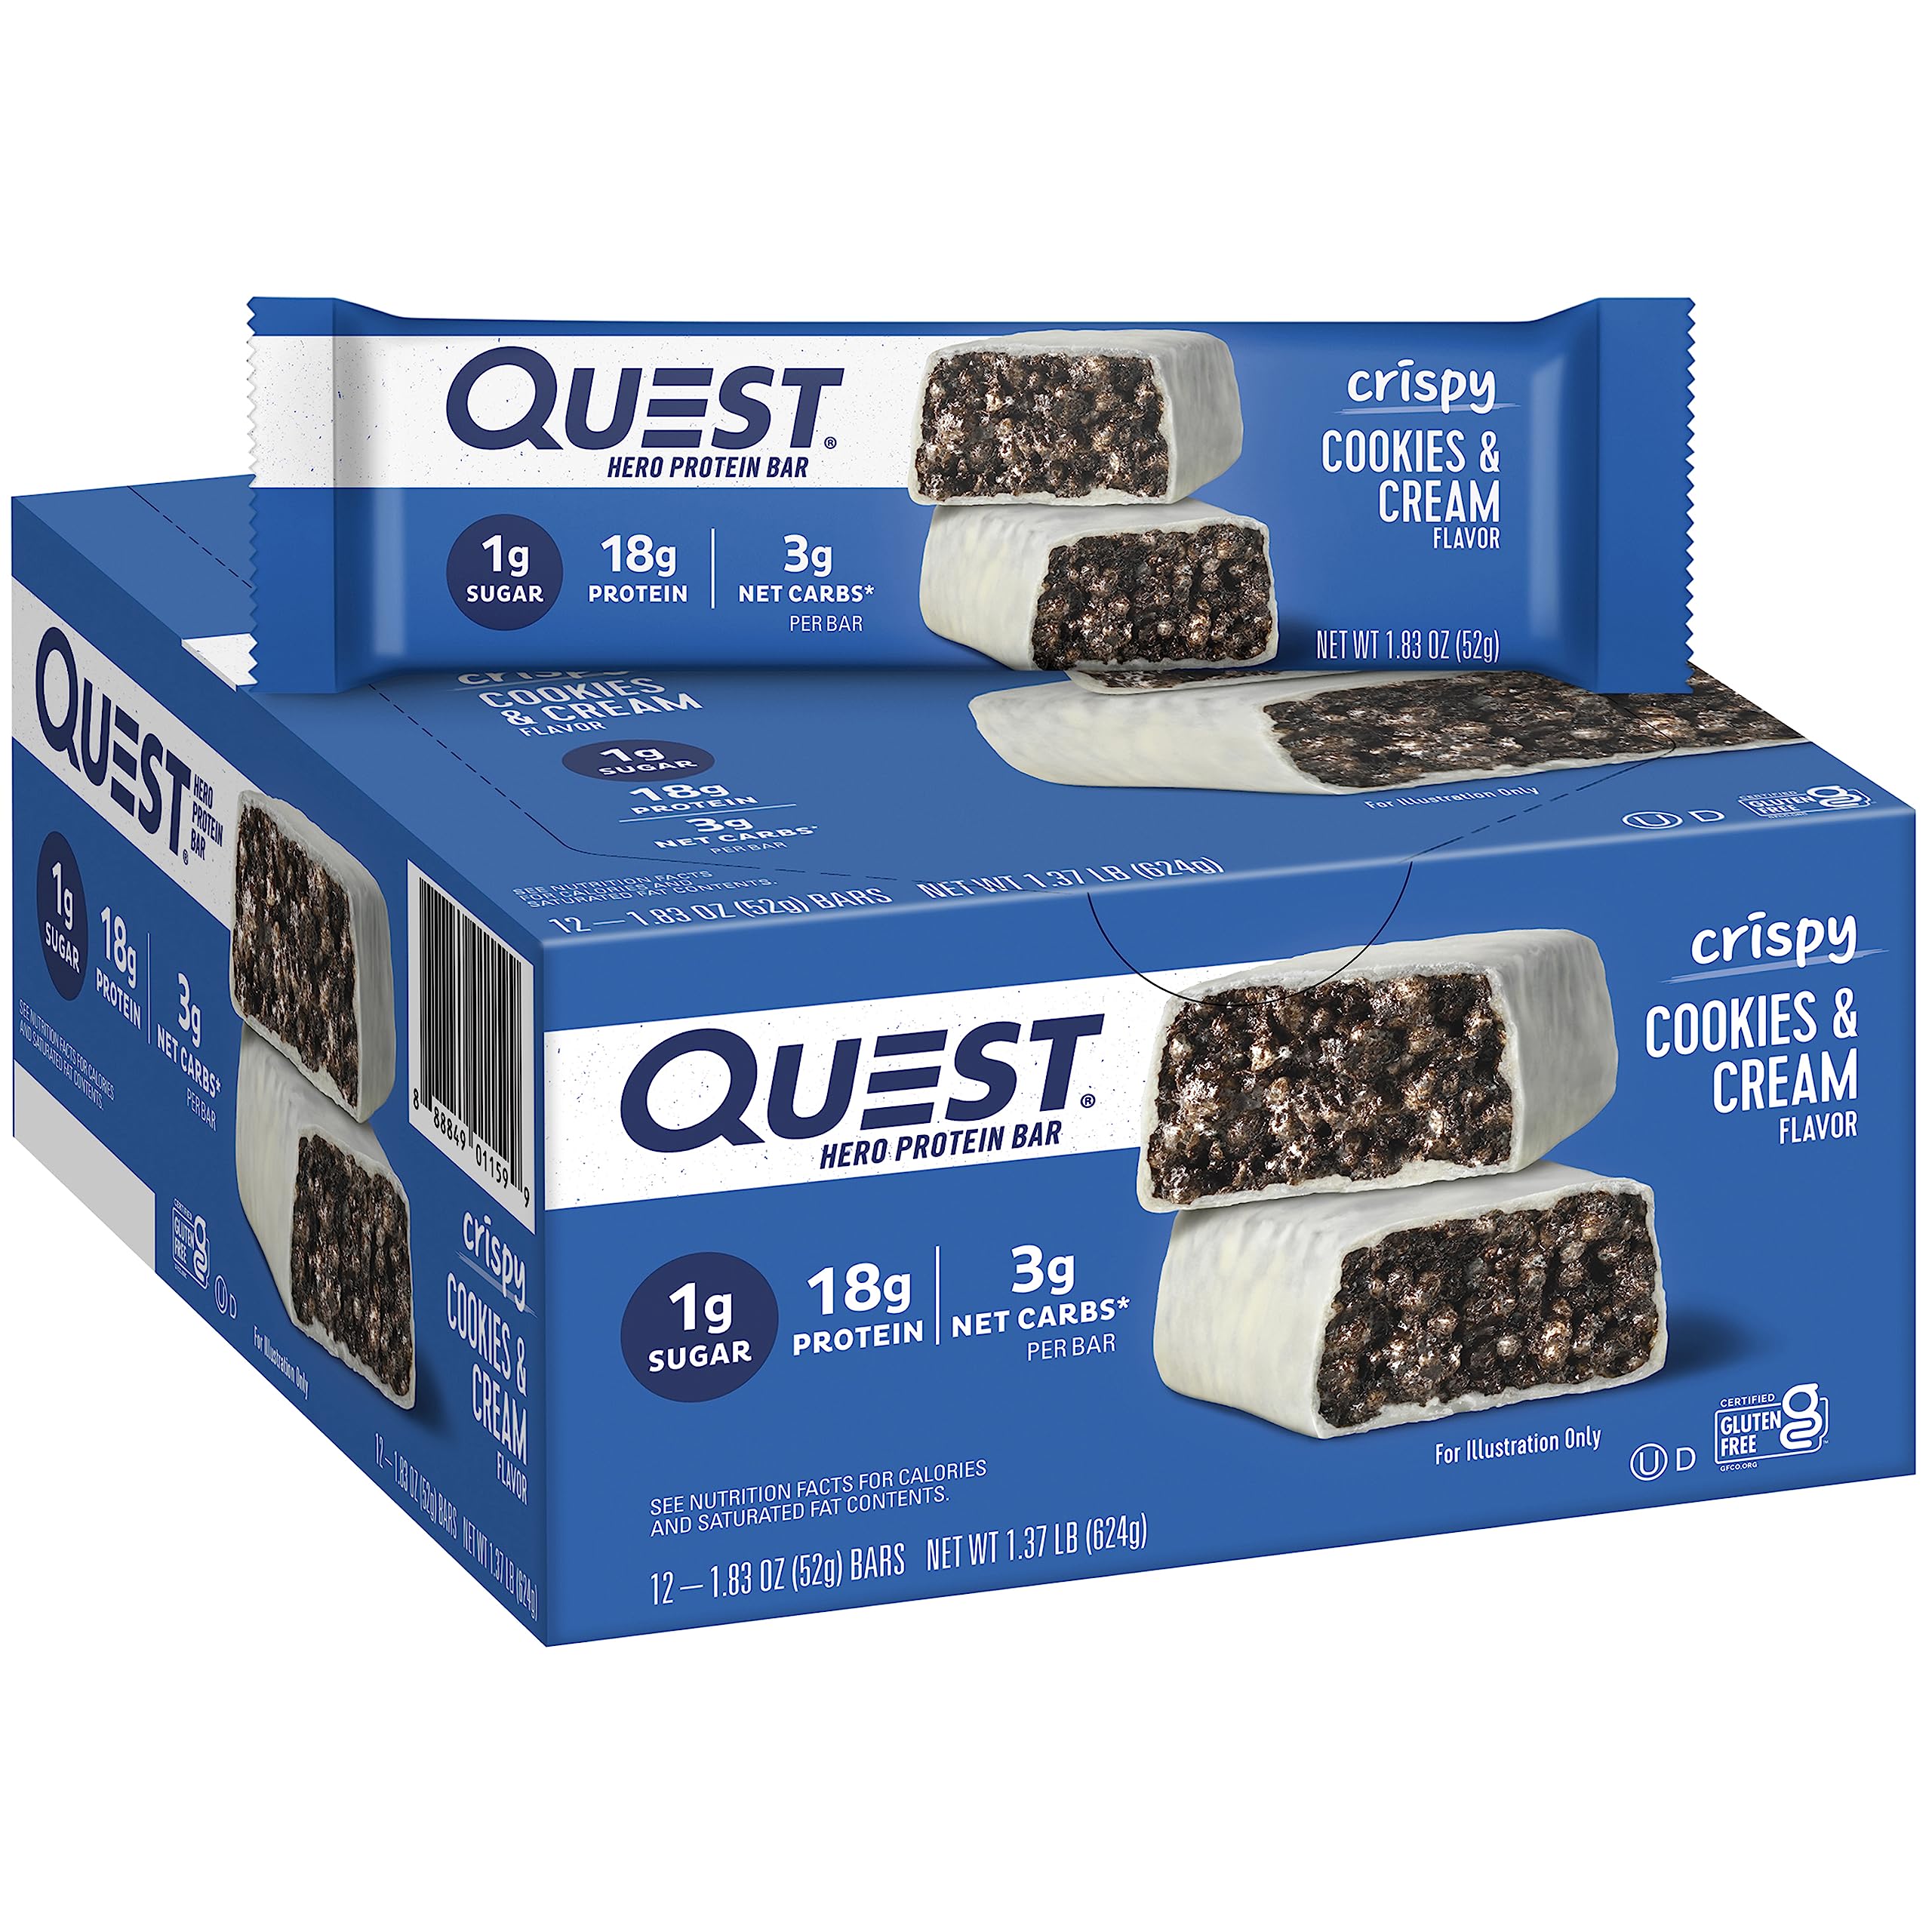 2 boxes of Quest Nutrition Crispy Cookies & Cream Hero Protein Bar (12 count each) with $5 promotional credit $33.98